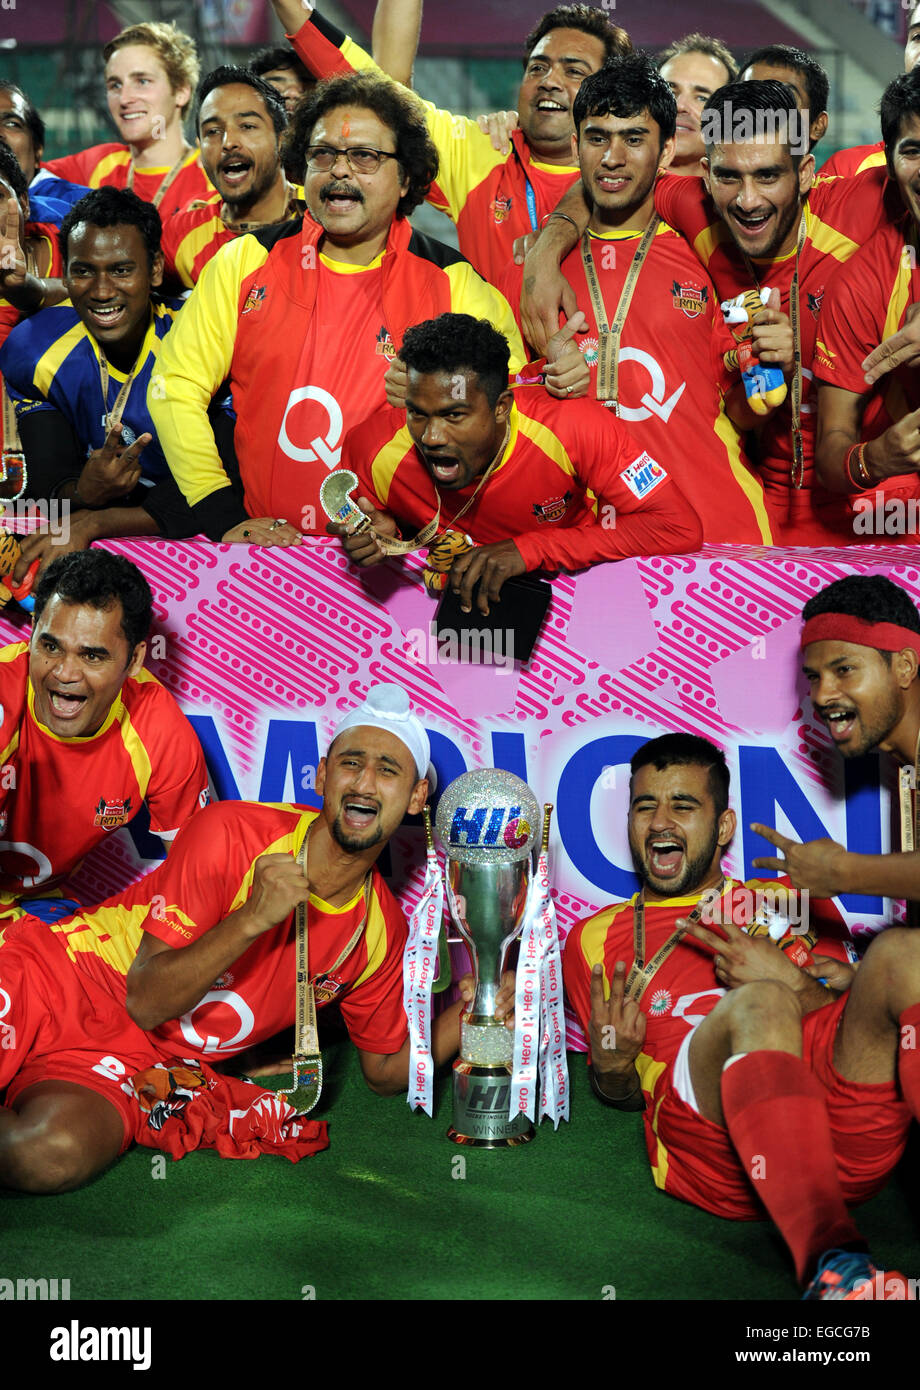 New Delhi, India. 22nd Feb, 2015. Players of Ranchi Rays pose for photos with the trophy after winning the final match of the Hockey India League 2015 against Punjab Warriors at the Major Dhyan Chand National Stadium in New Delhi, India, Feb. 22, 2015. Ranchi Rays defeated Punjab Warriors in the tie-breaker to clinch the title. © Partha Sarkar/Xinhua/Alamy Live News Stock Photo